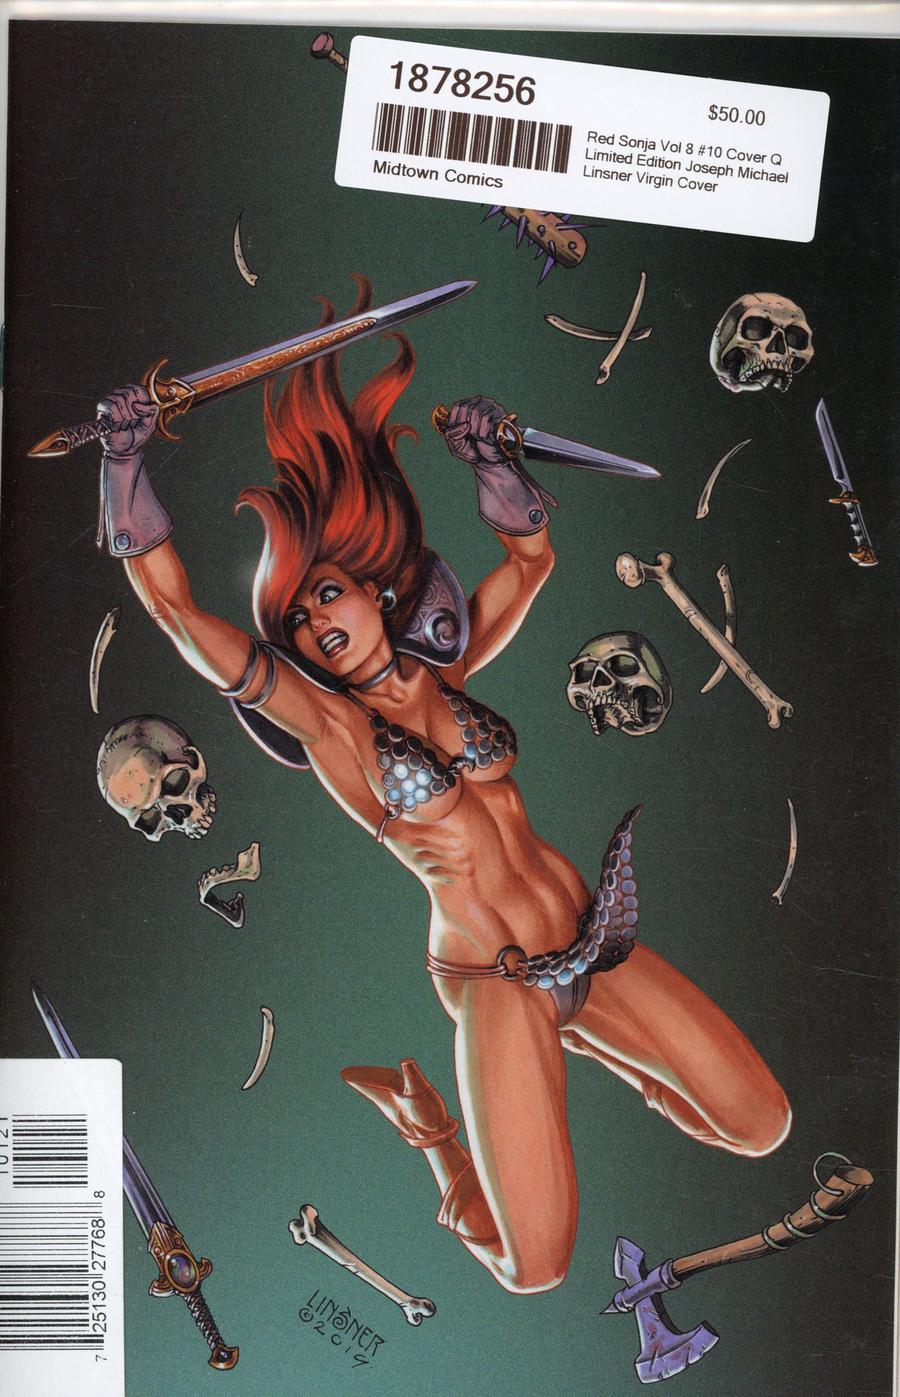 Red Sonja Vol 8 #10 Cover Q Limited Edition Joseph Michael Linsner Virgin Cover